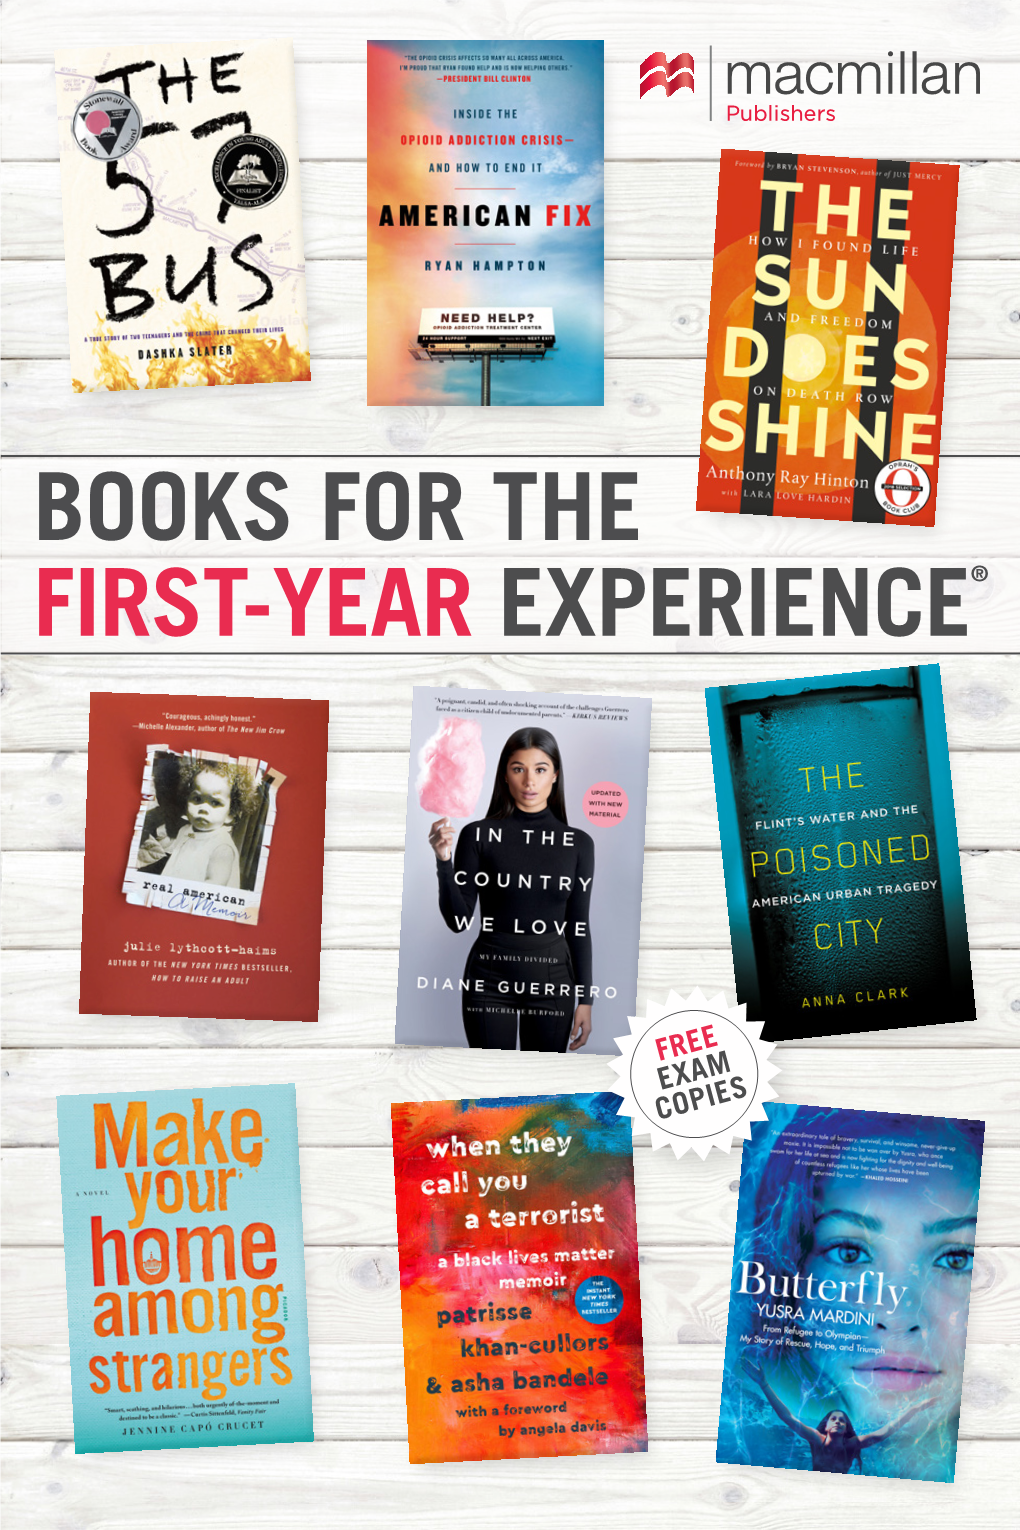 Books for the First-Year Experience®